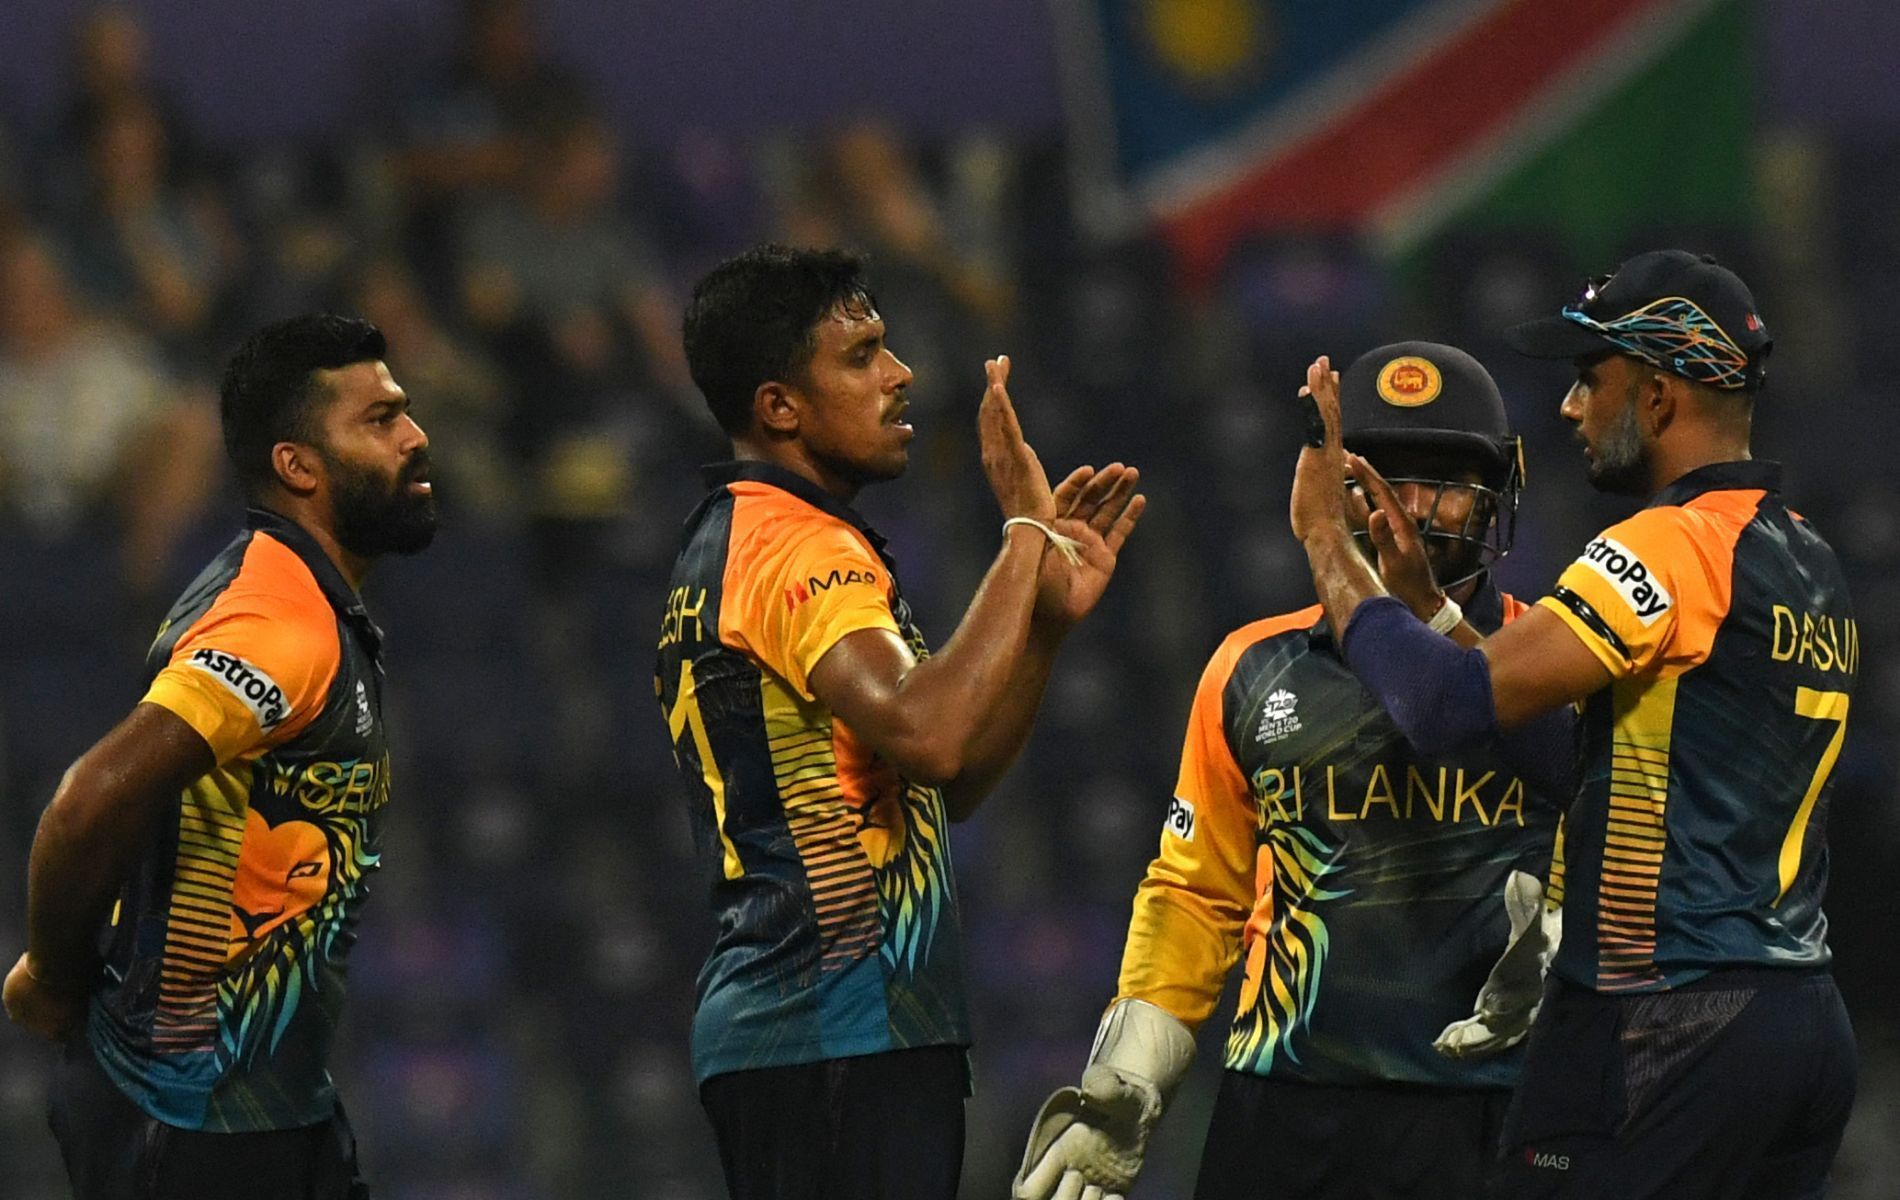 Sri Lanka cruised to a 7-wicket win against Namibia in the T20 World Cup.